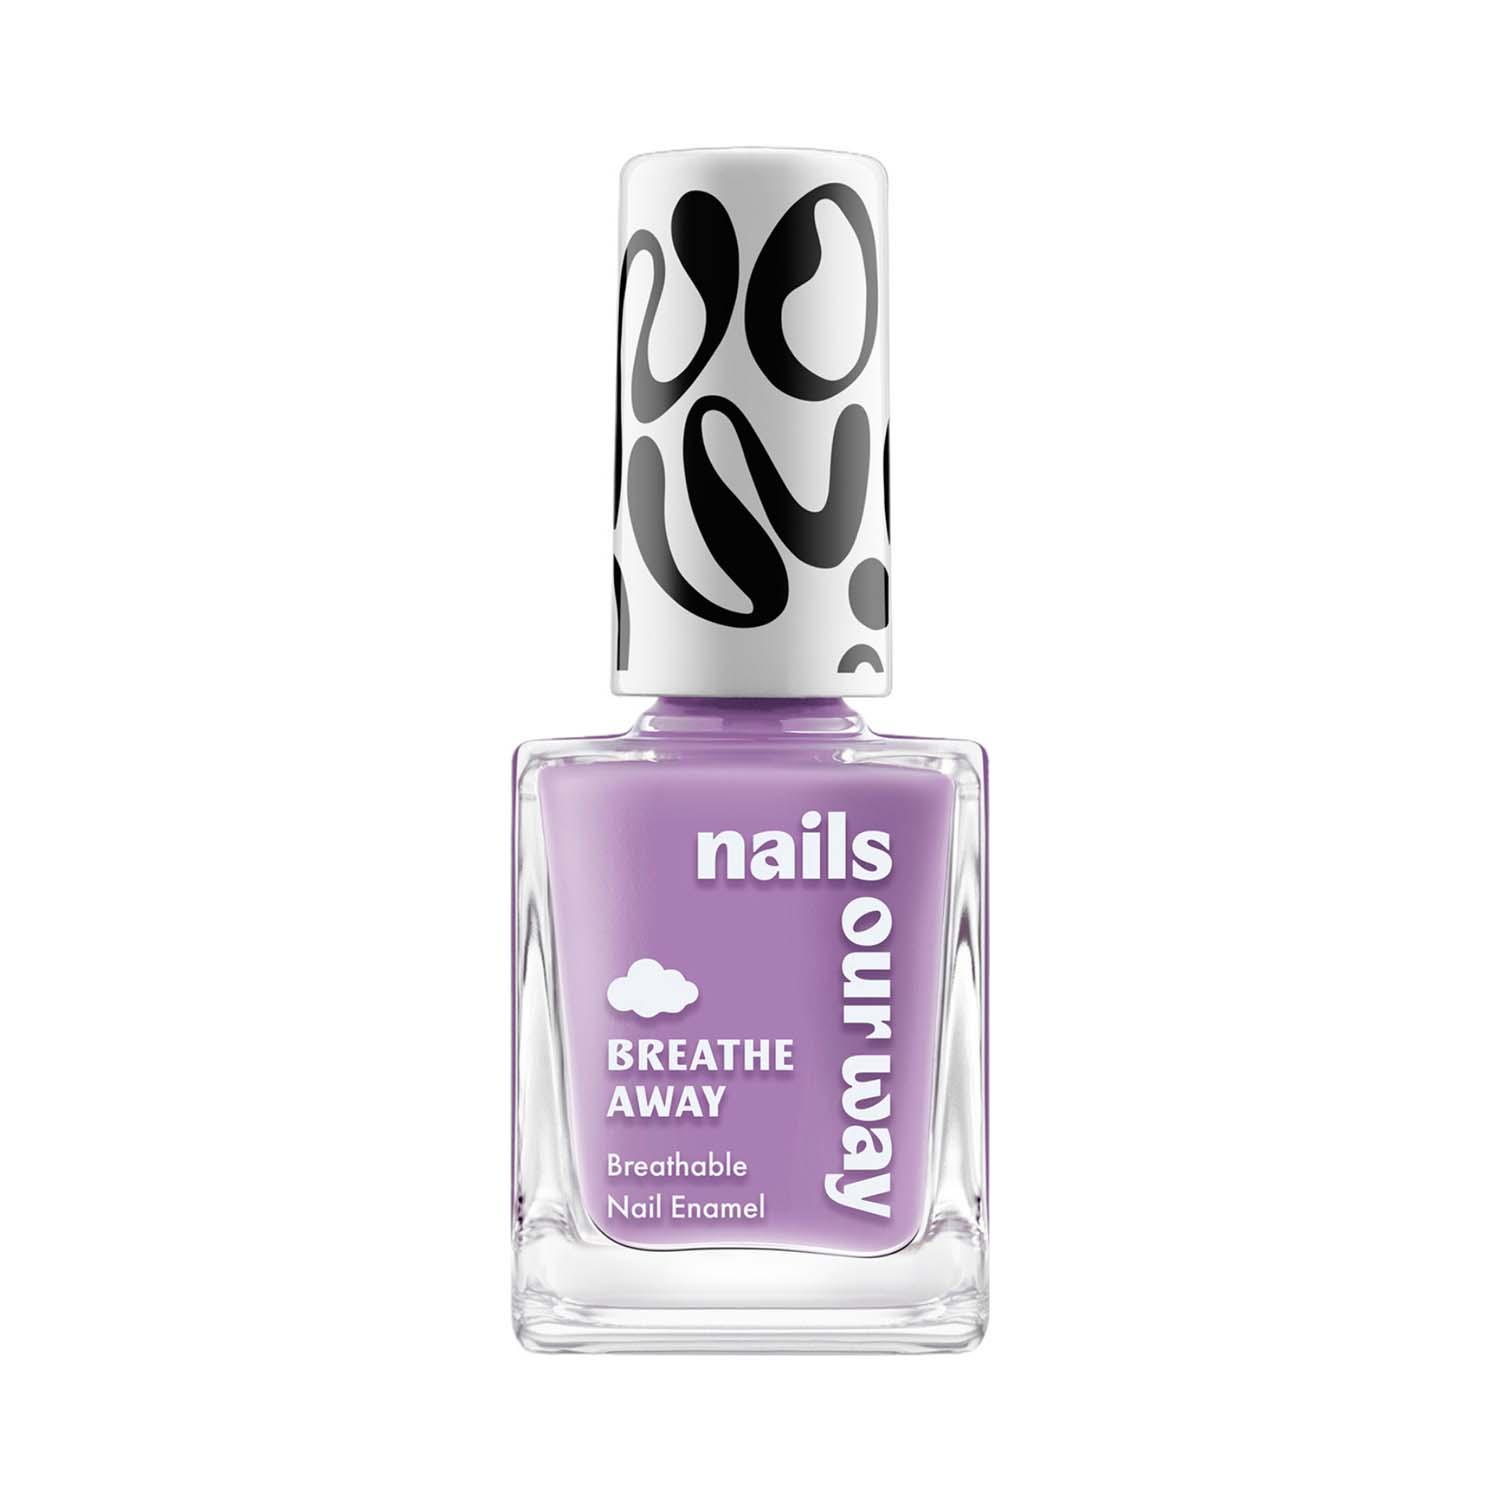 Nails Our Way | Nails Our Way Breathe Away Nail Enamel - Periwinkle (10 ml)